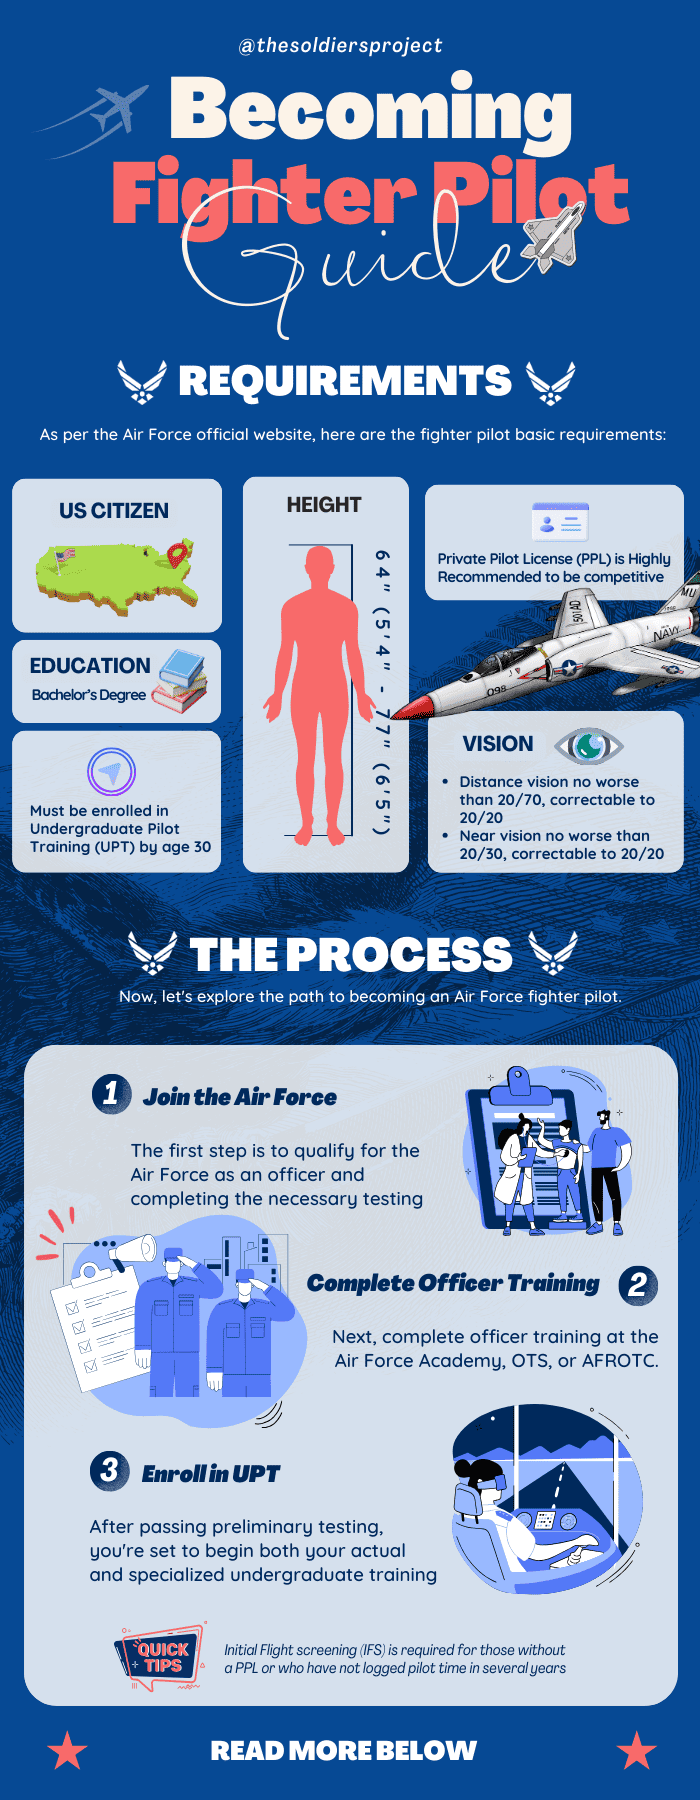 requirements-and-process-to-be-a-fighter-pilot